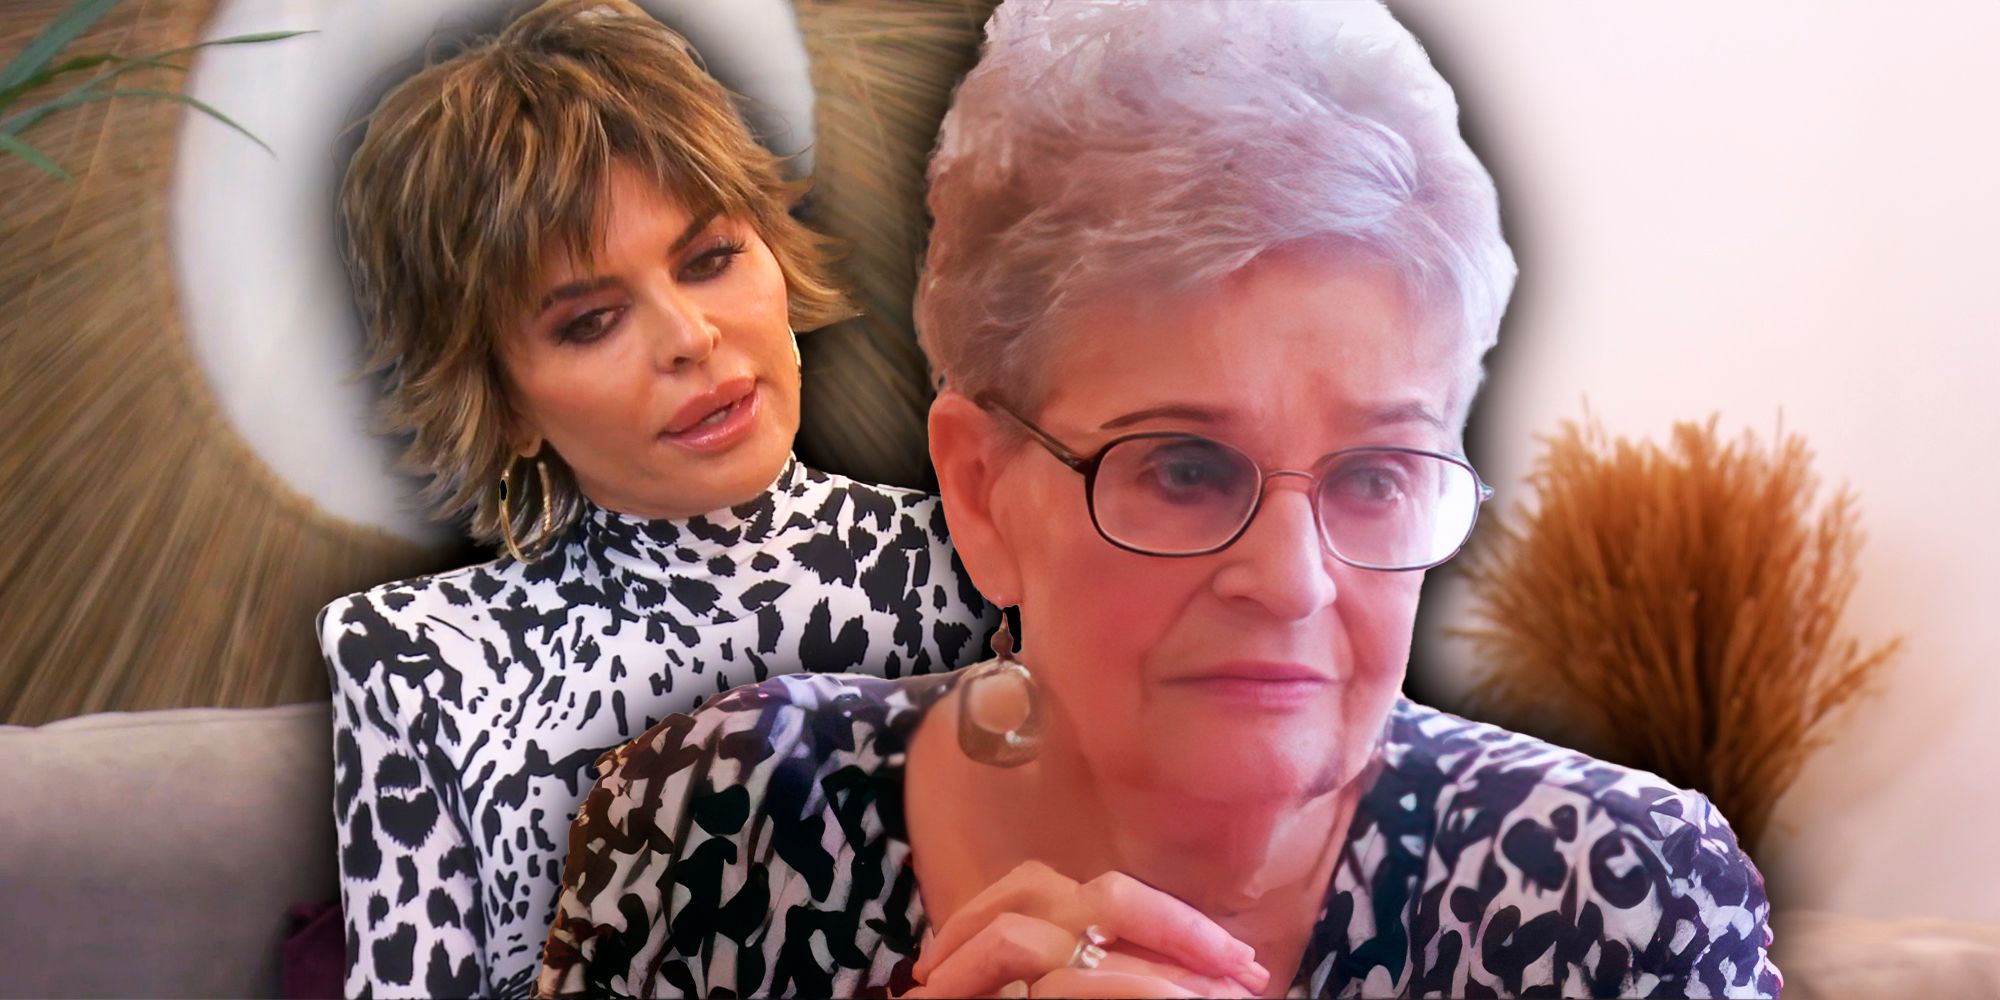 RHOBH's Lisa Rinna and her mother Lois Rinna wearing similar outfits